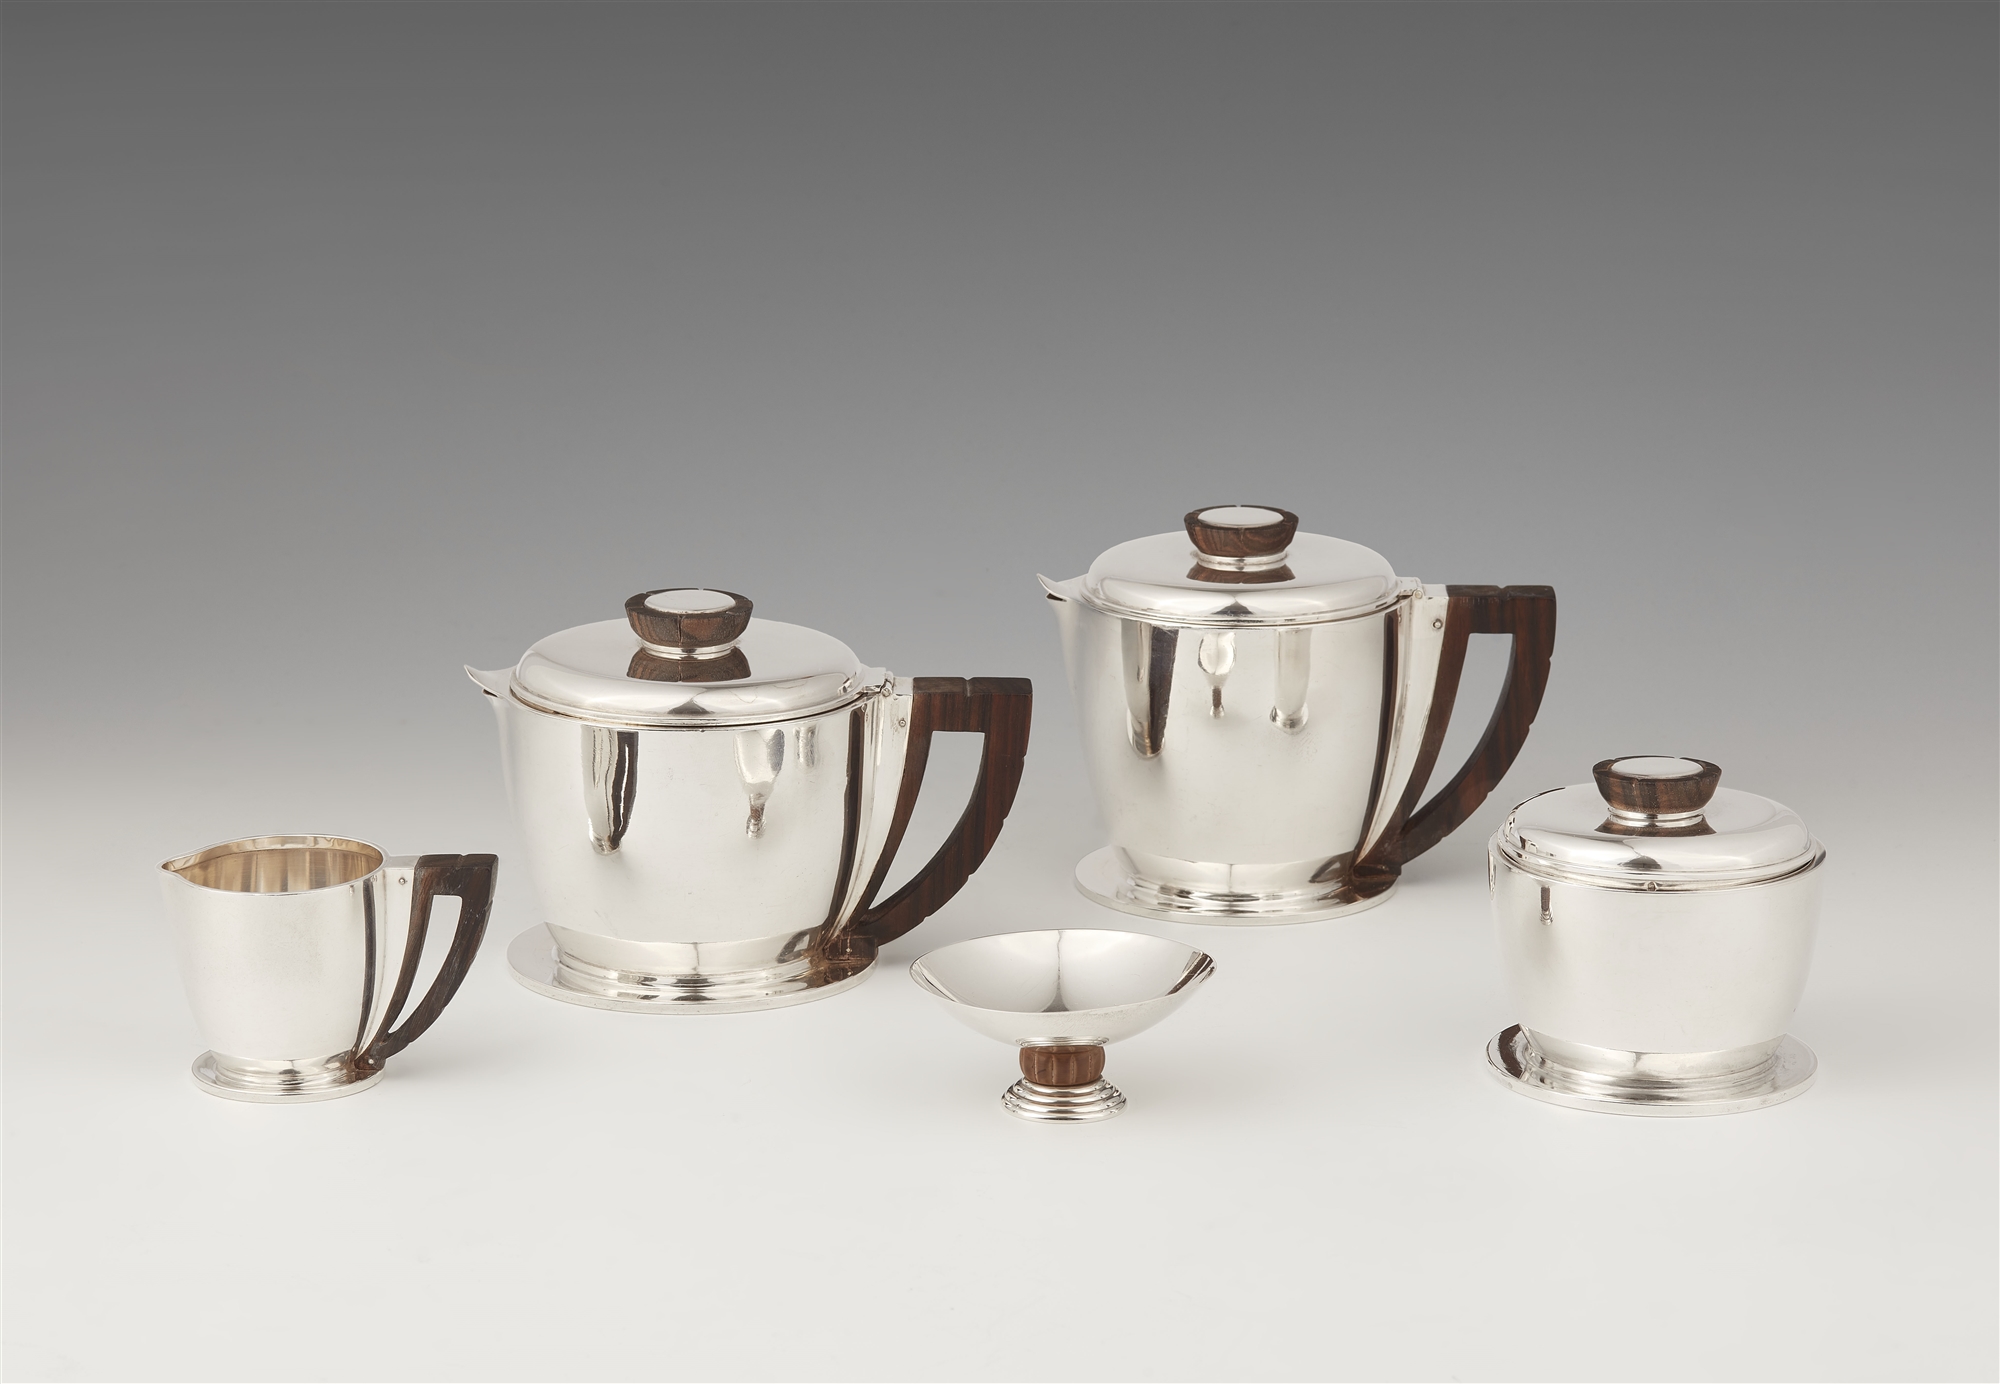 A silver tea and coffee service made by Jean-Emile Puiforcat